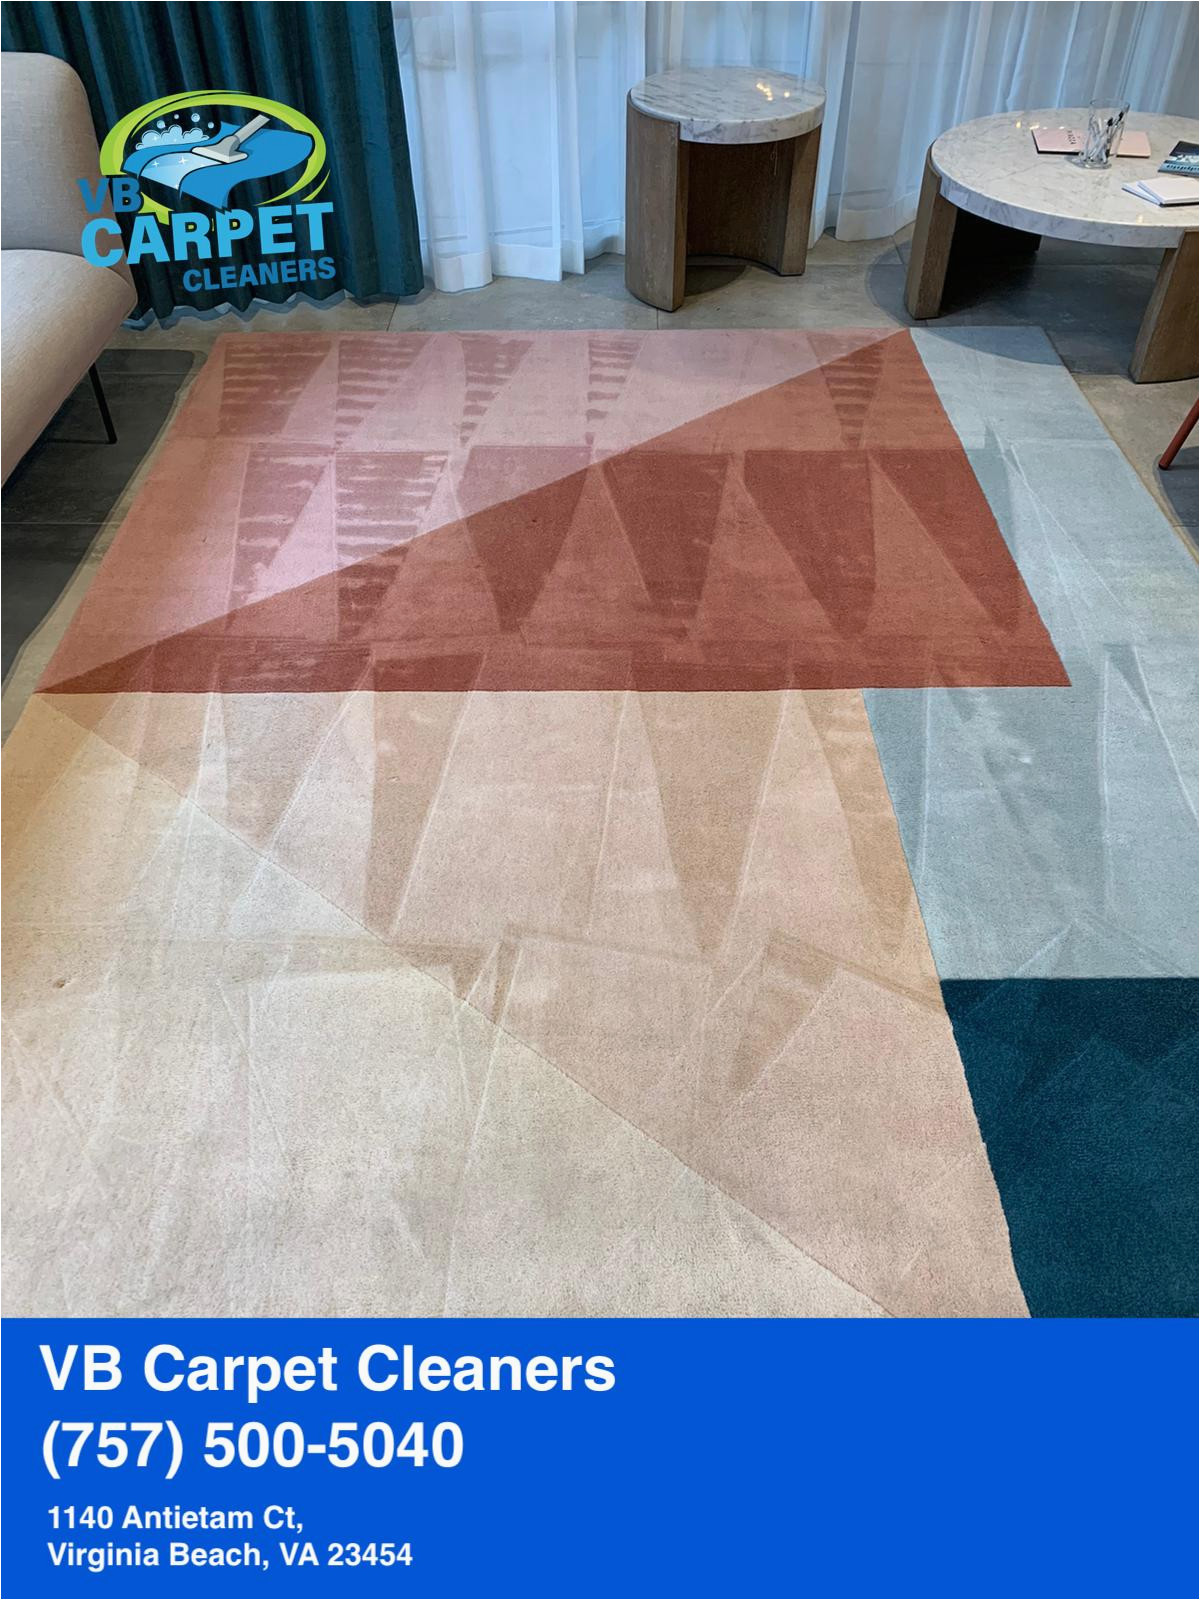 Area Rug Cleaning Virginia Beach Carpet Cleaning norfolk & Portsmouth, Va – Vb Carpet Cleaners